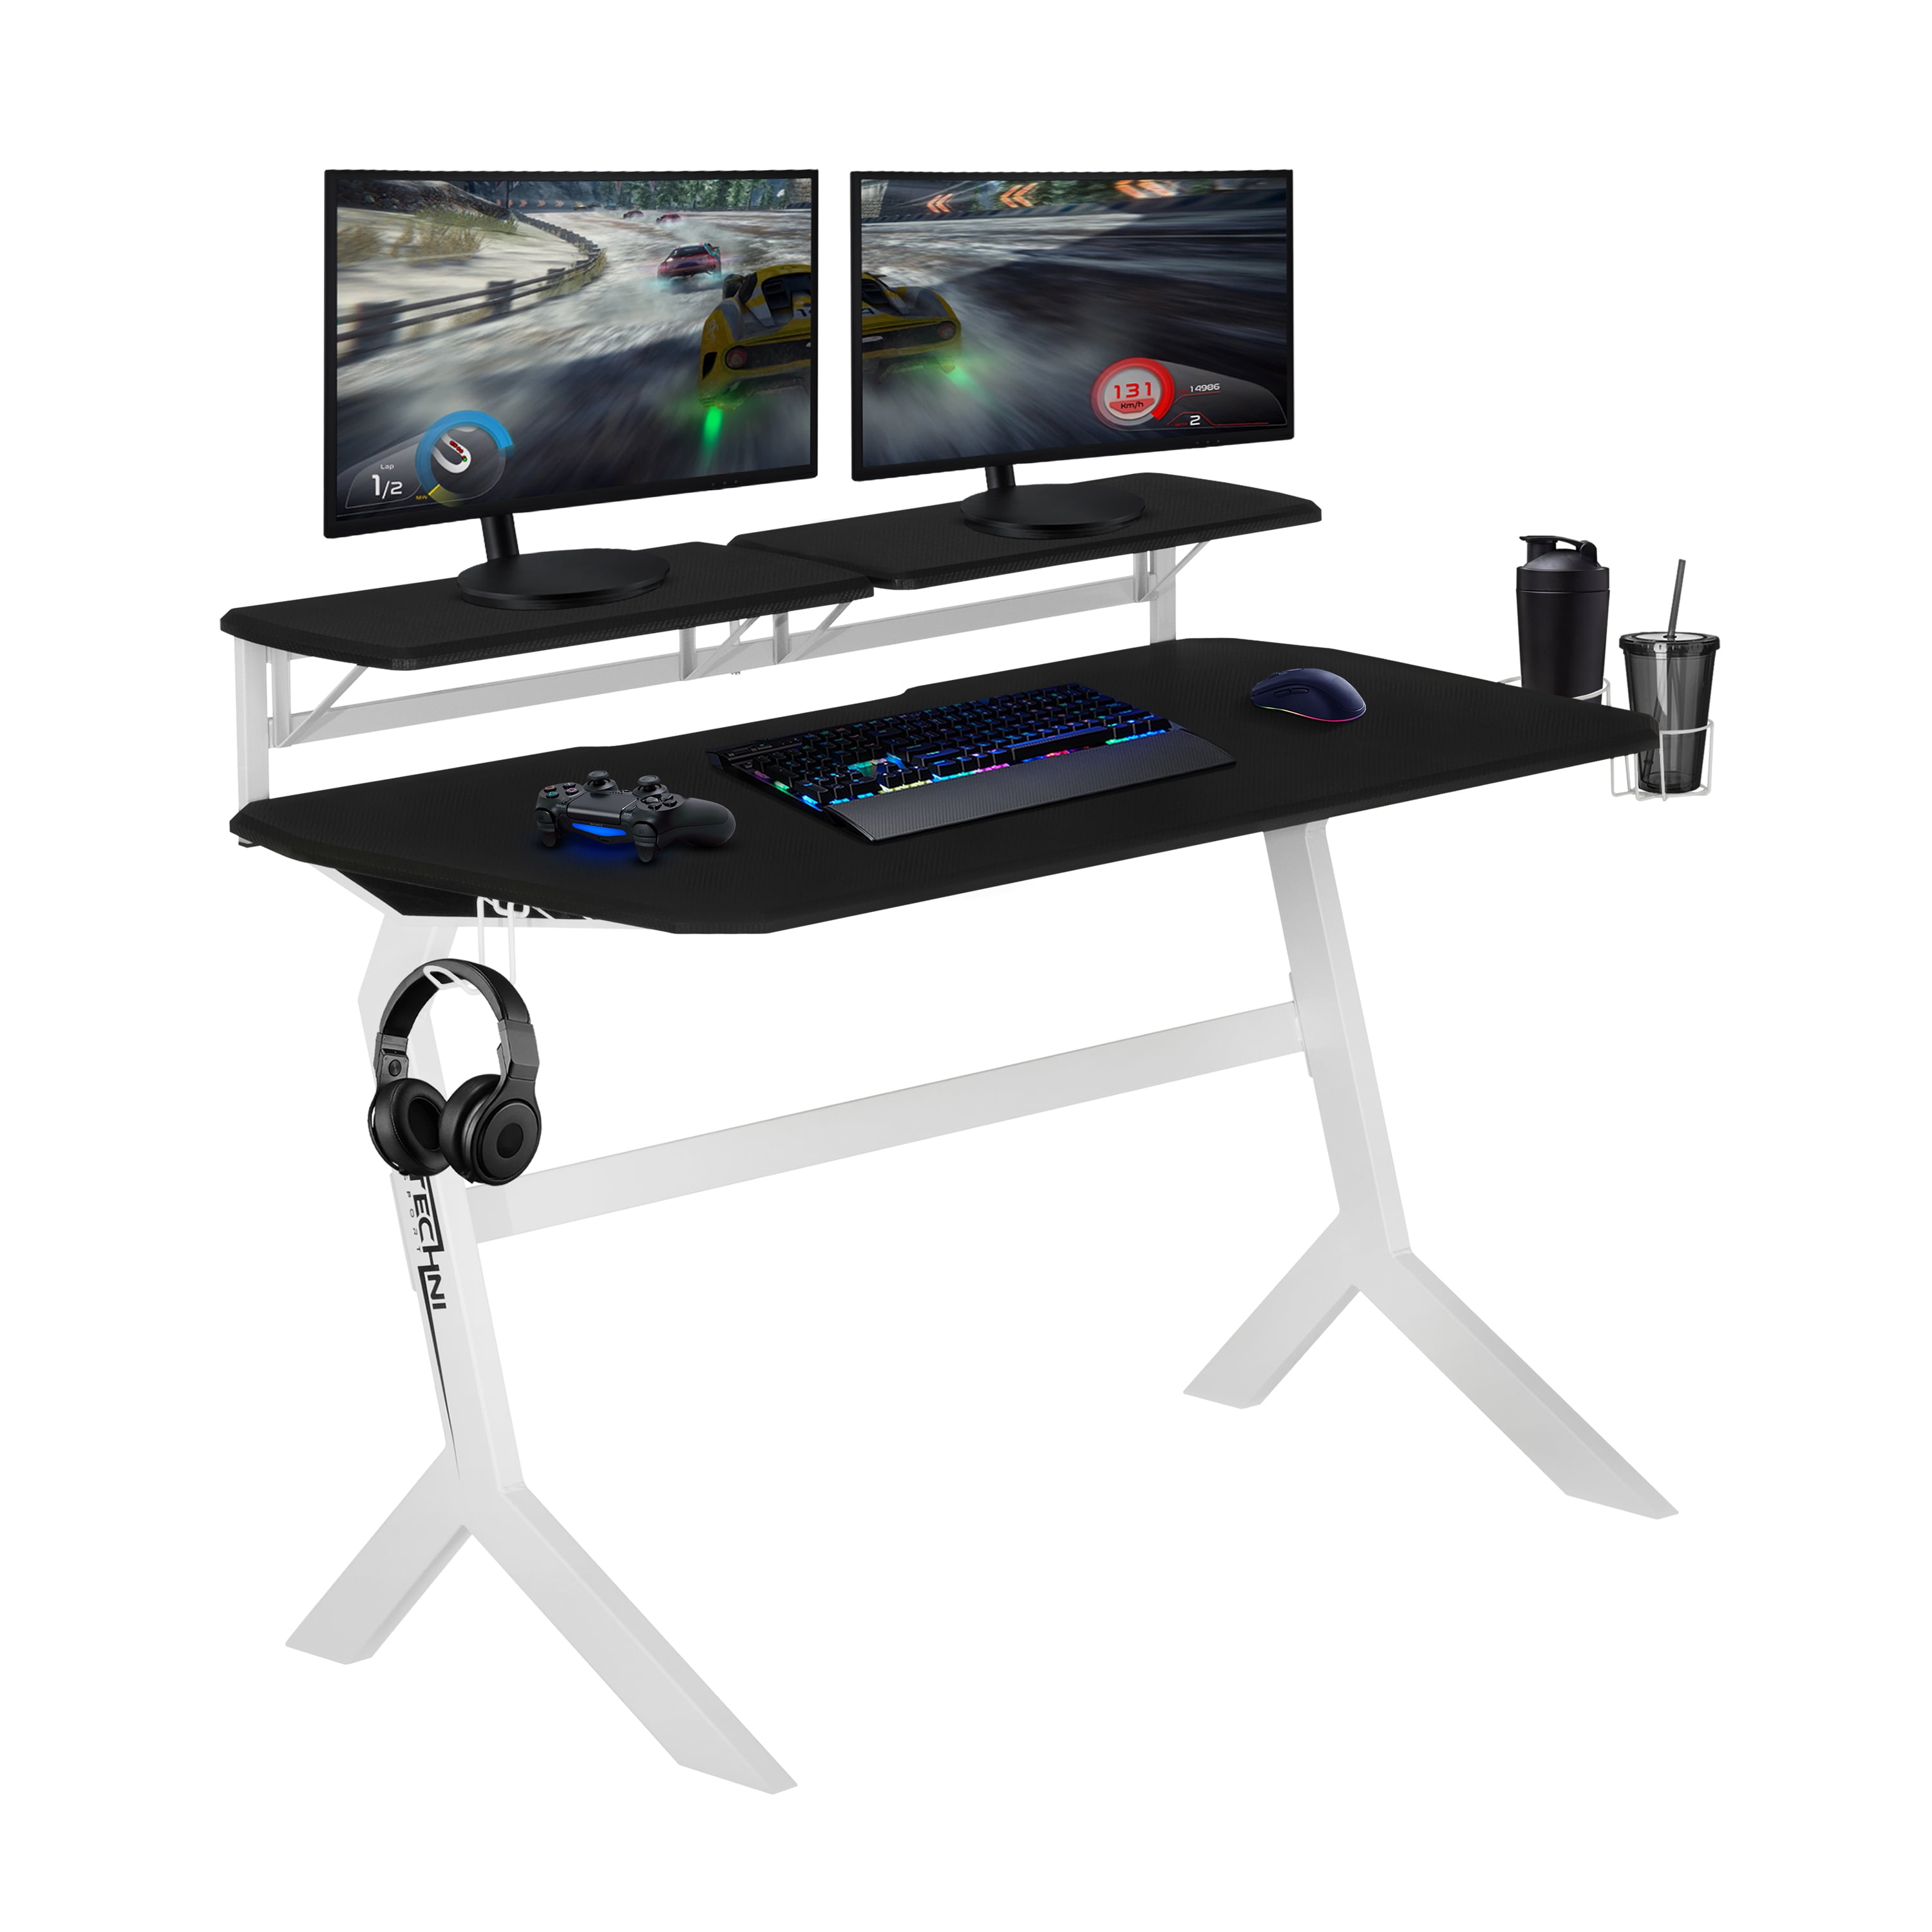 Techni Sport Gaming Desk - Two-Way Computer Desk with Elevated Monitor  Stands, CD Rack, Cup Holder, & Accessories Storage for a Complete Gaming  Setup